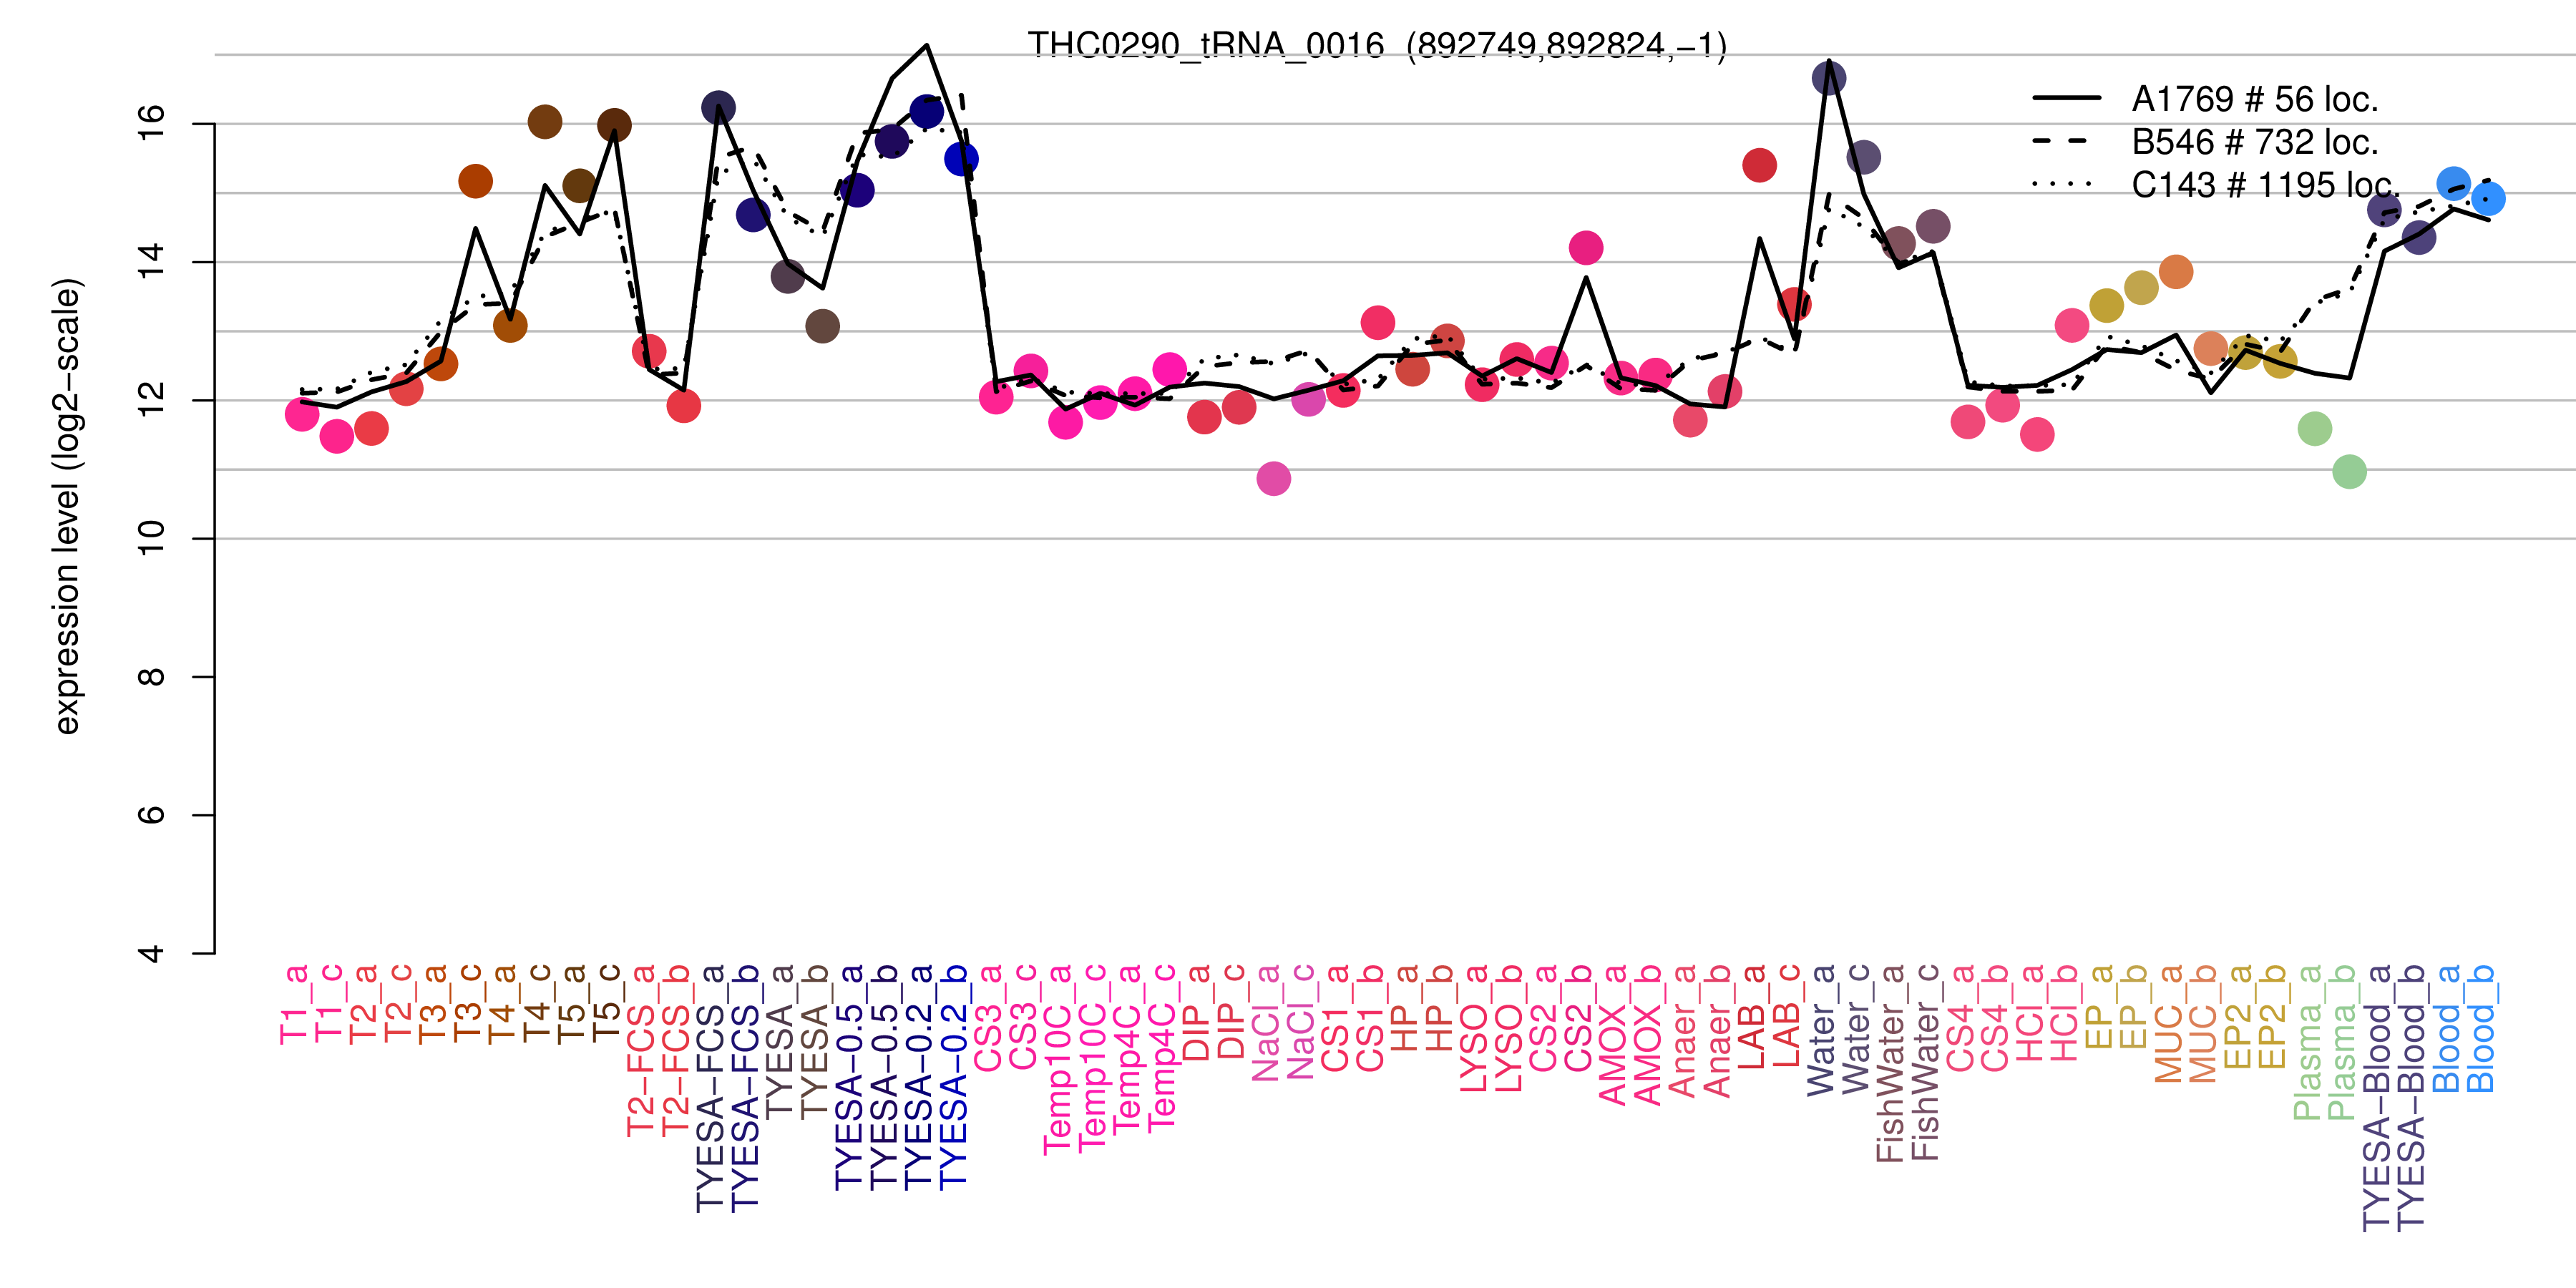 THC0290_tRNA_0016 expression levels among conditions